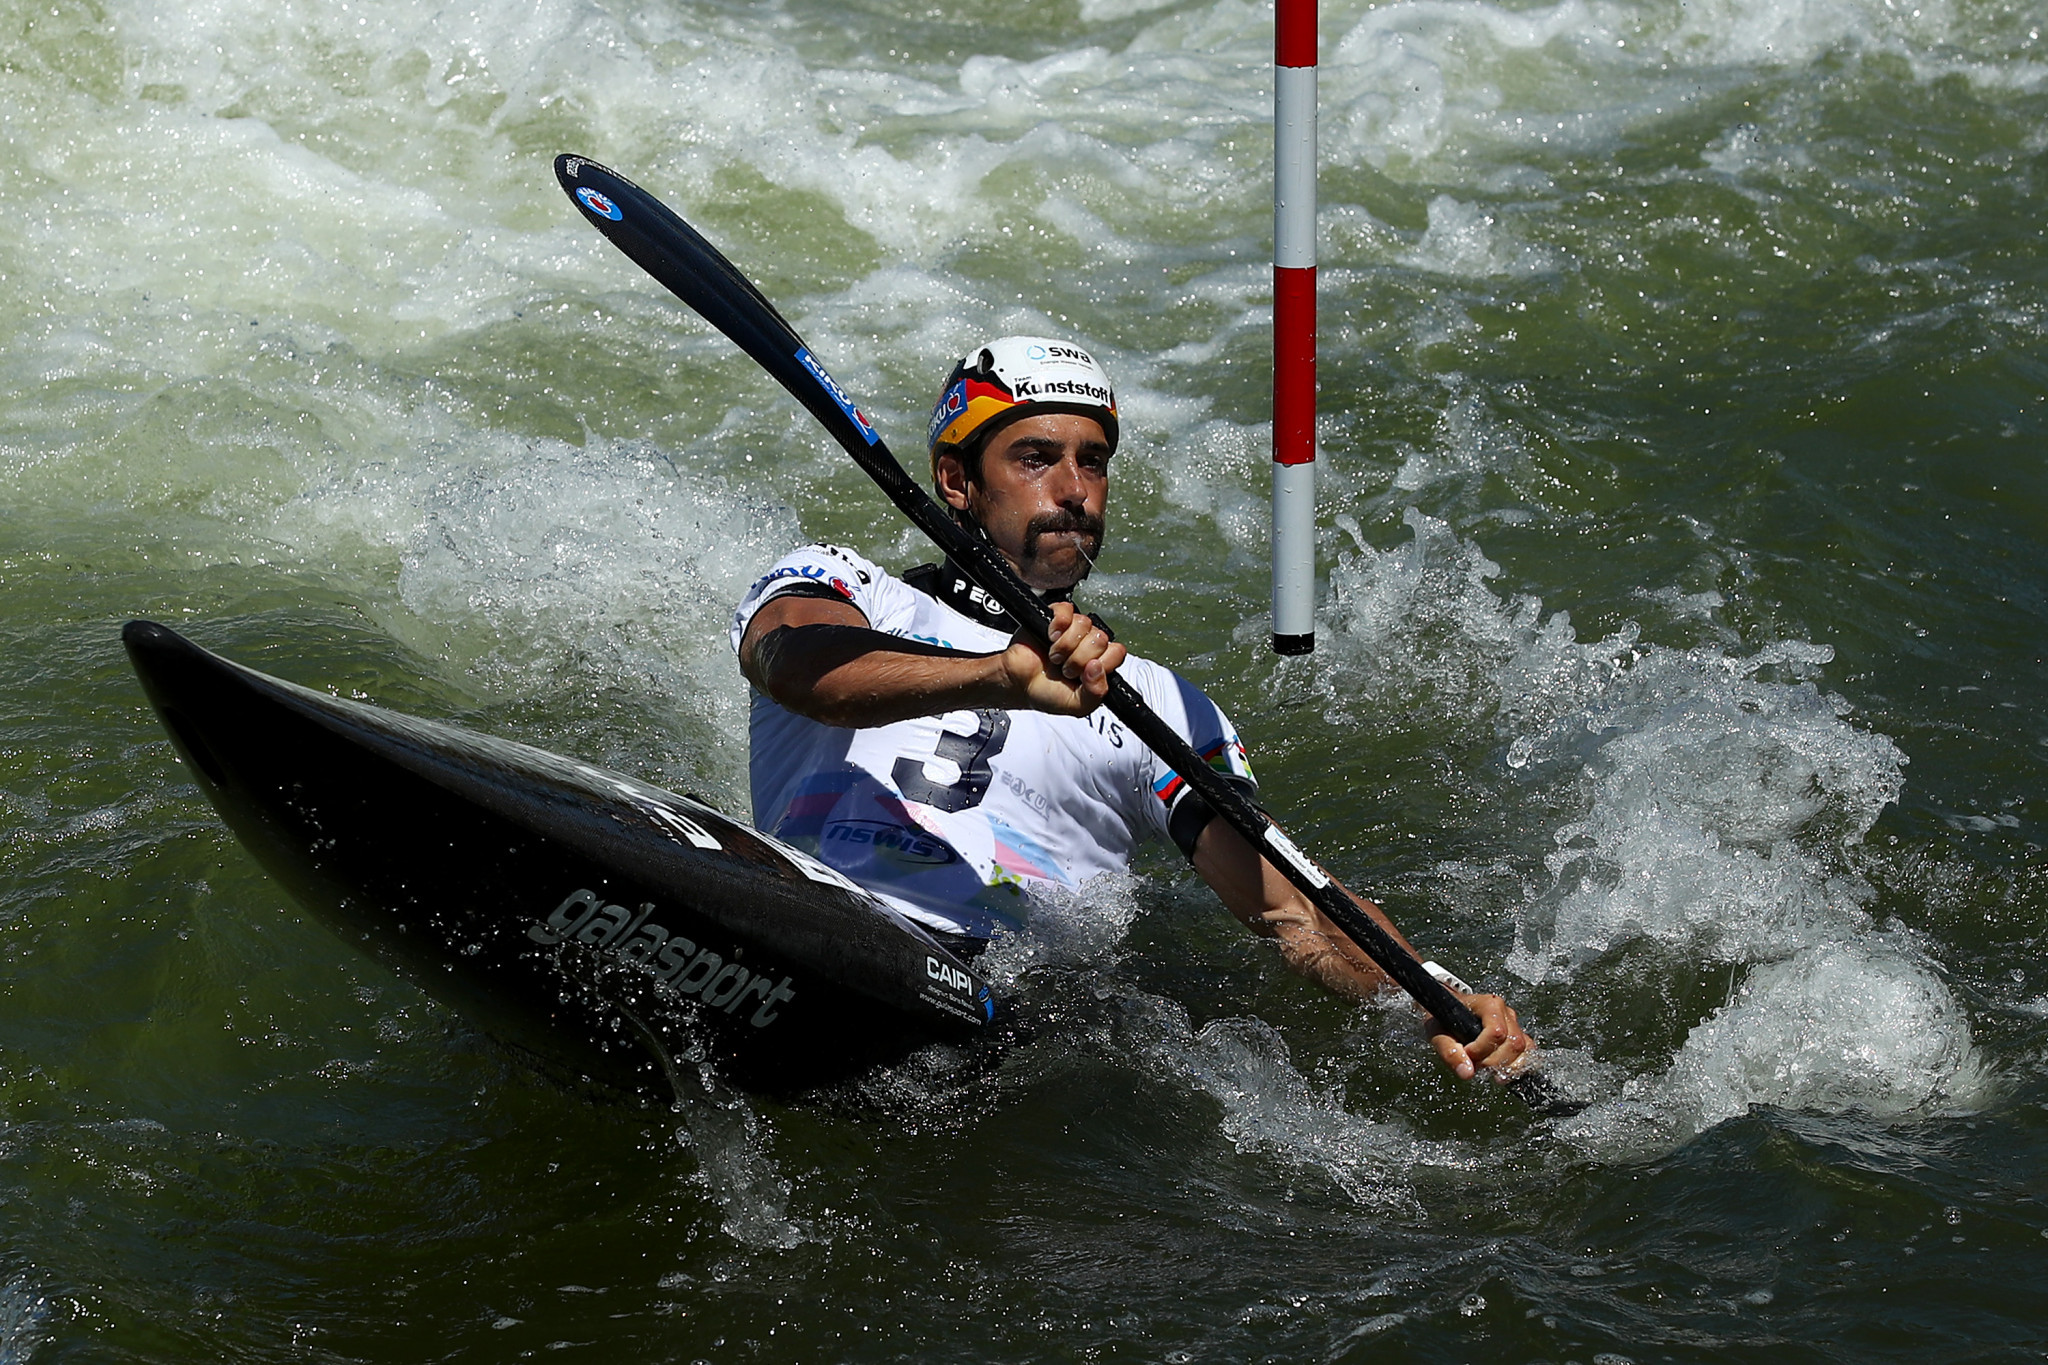 Germany’s world champion Hannes Aigner is among the entrants for the men's K1 event ©Getty Images